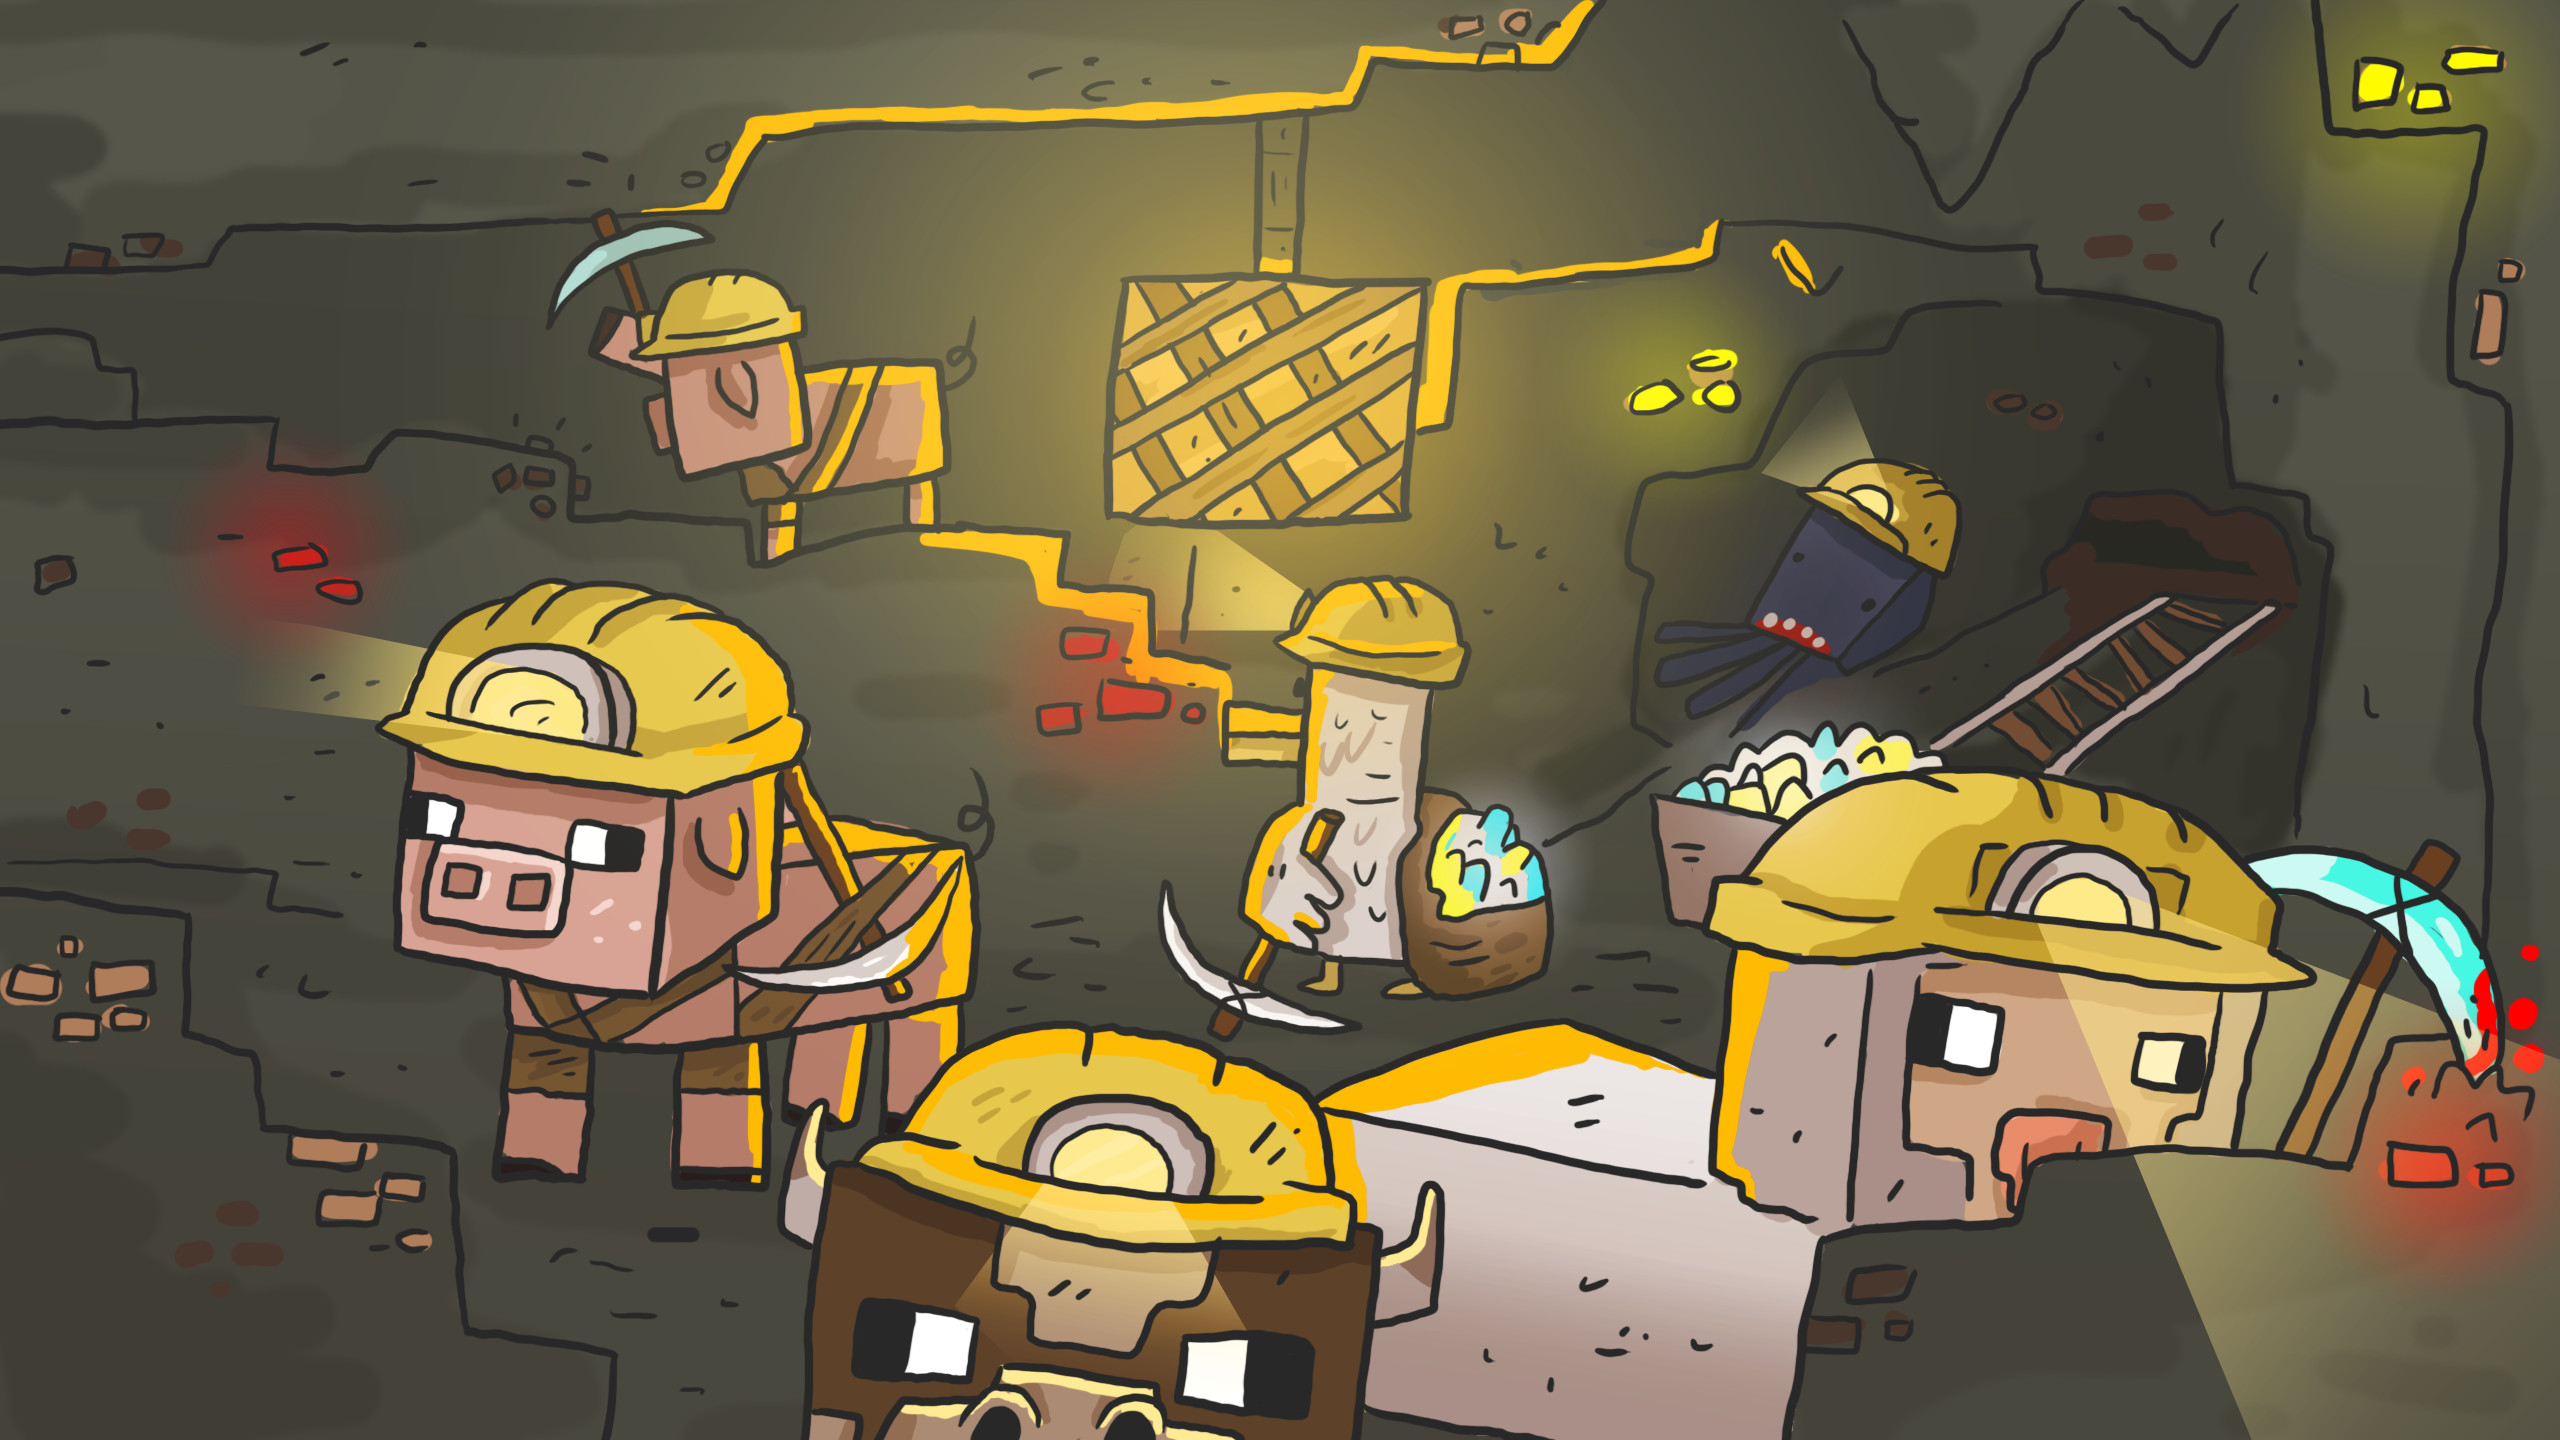 2560x1440 Minecraft draw dungeon Wallpaper with a mining Sheep, Cow, Squid, Chicken  and two Pigs.